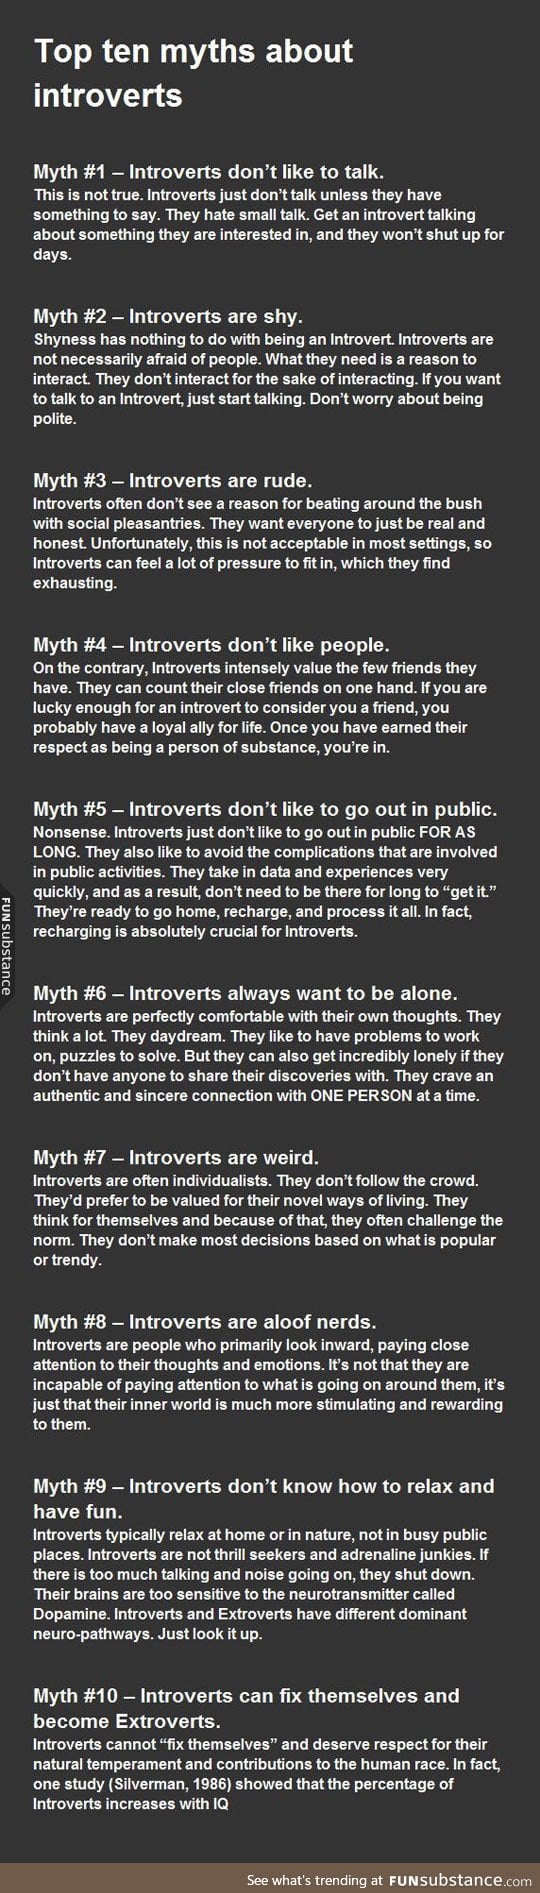 Myths about introvert people